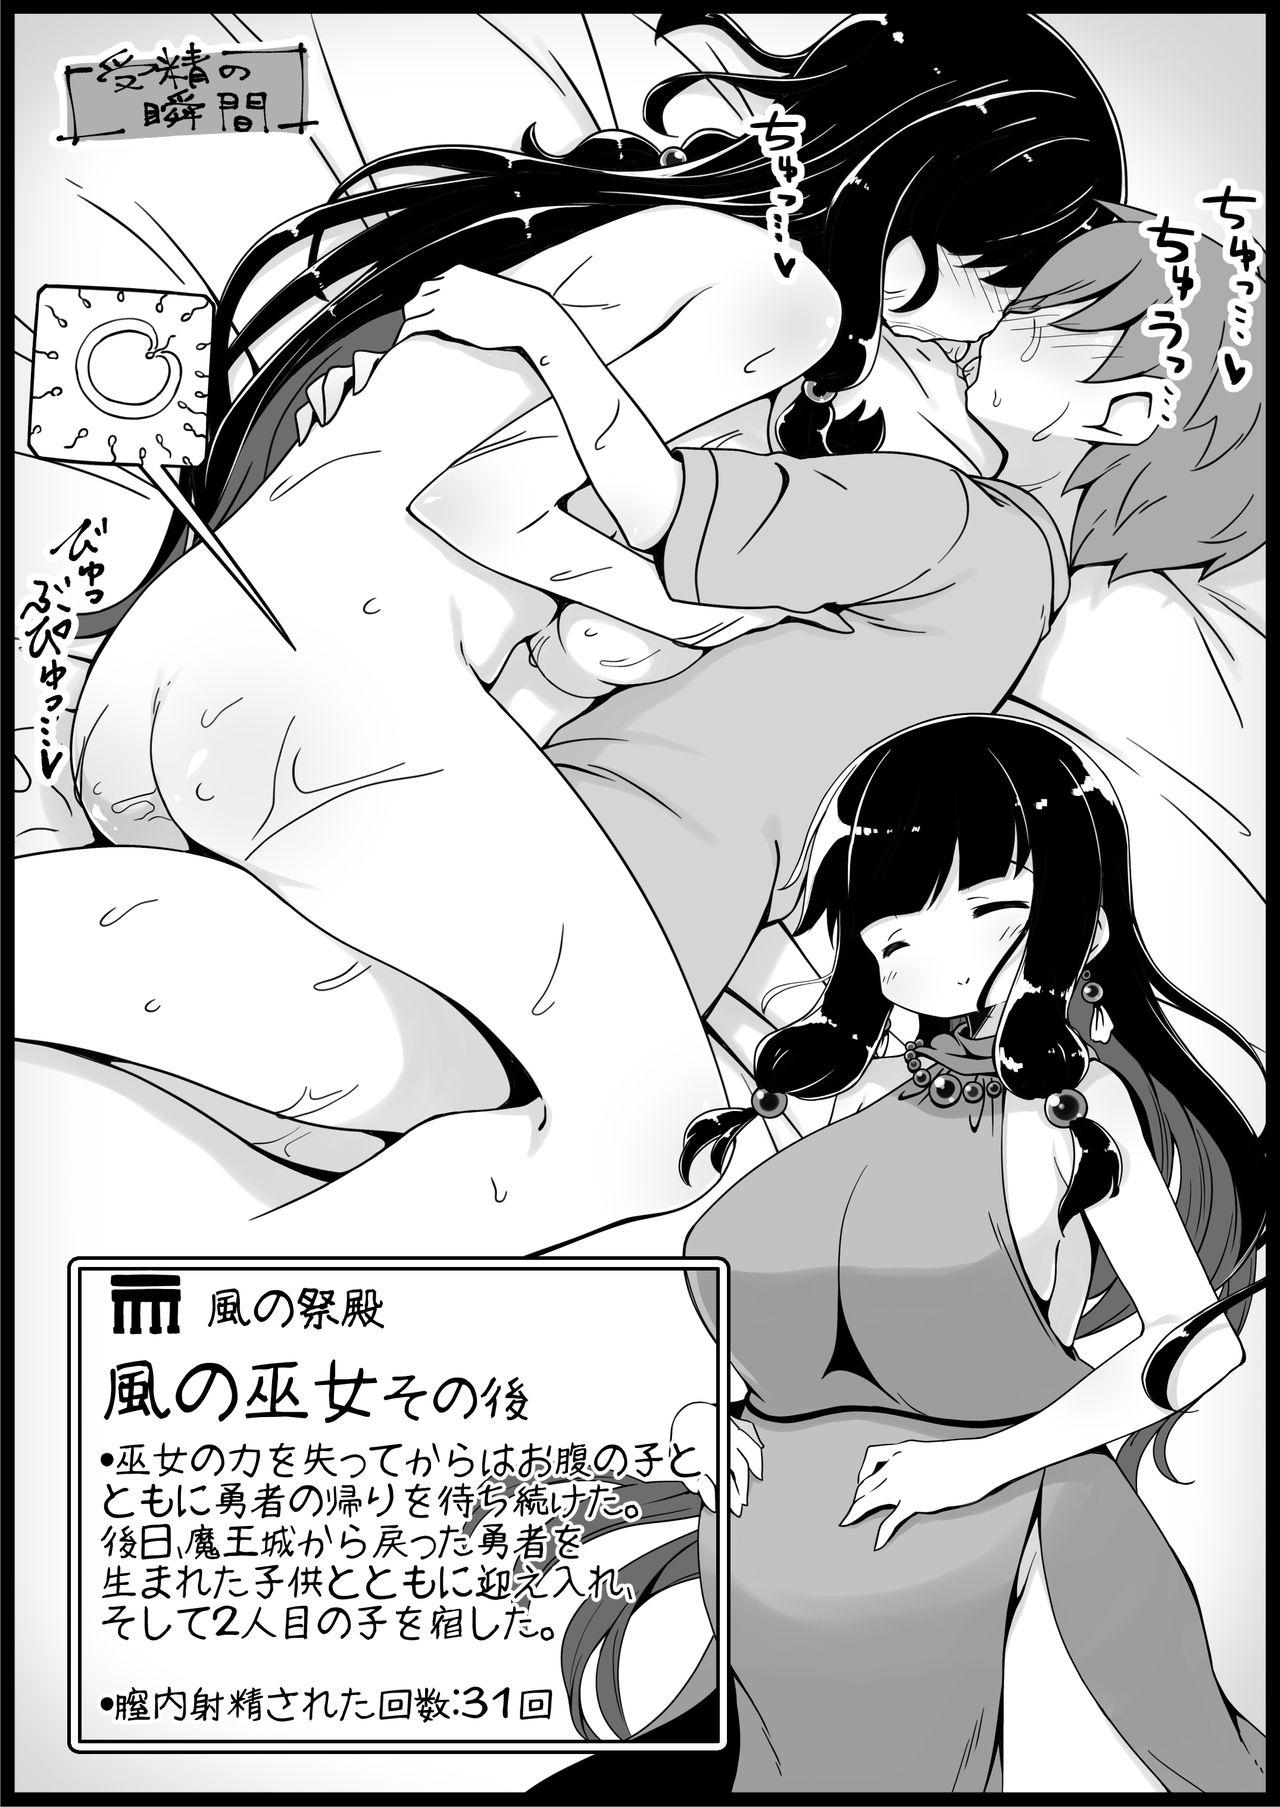 [Succubus Egg] Fantasy World 2 Too Forgiving to Heroes-Continued NPC (mob) Opponent-Centered Short H Manga Collection- 48